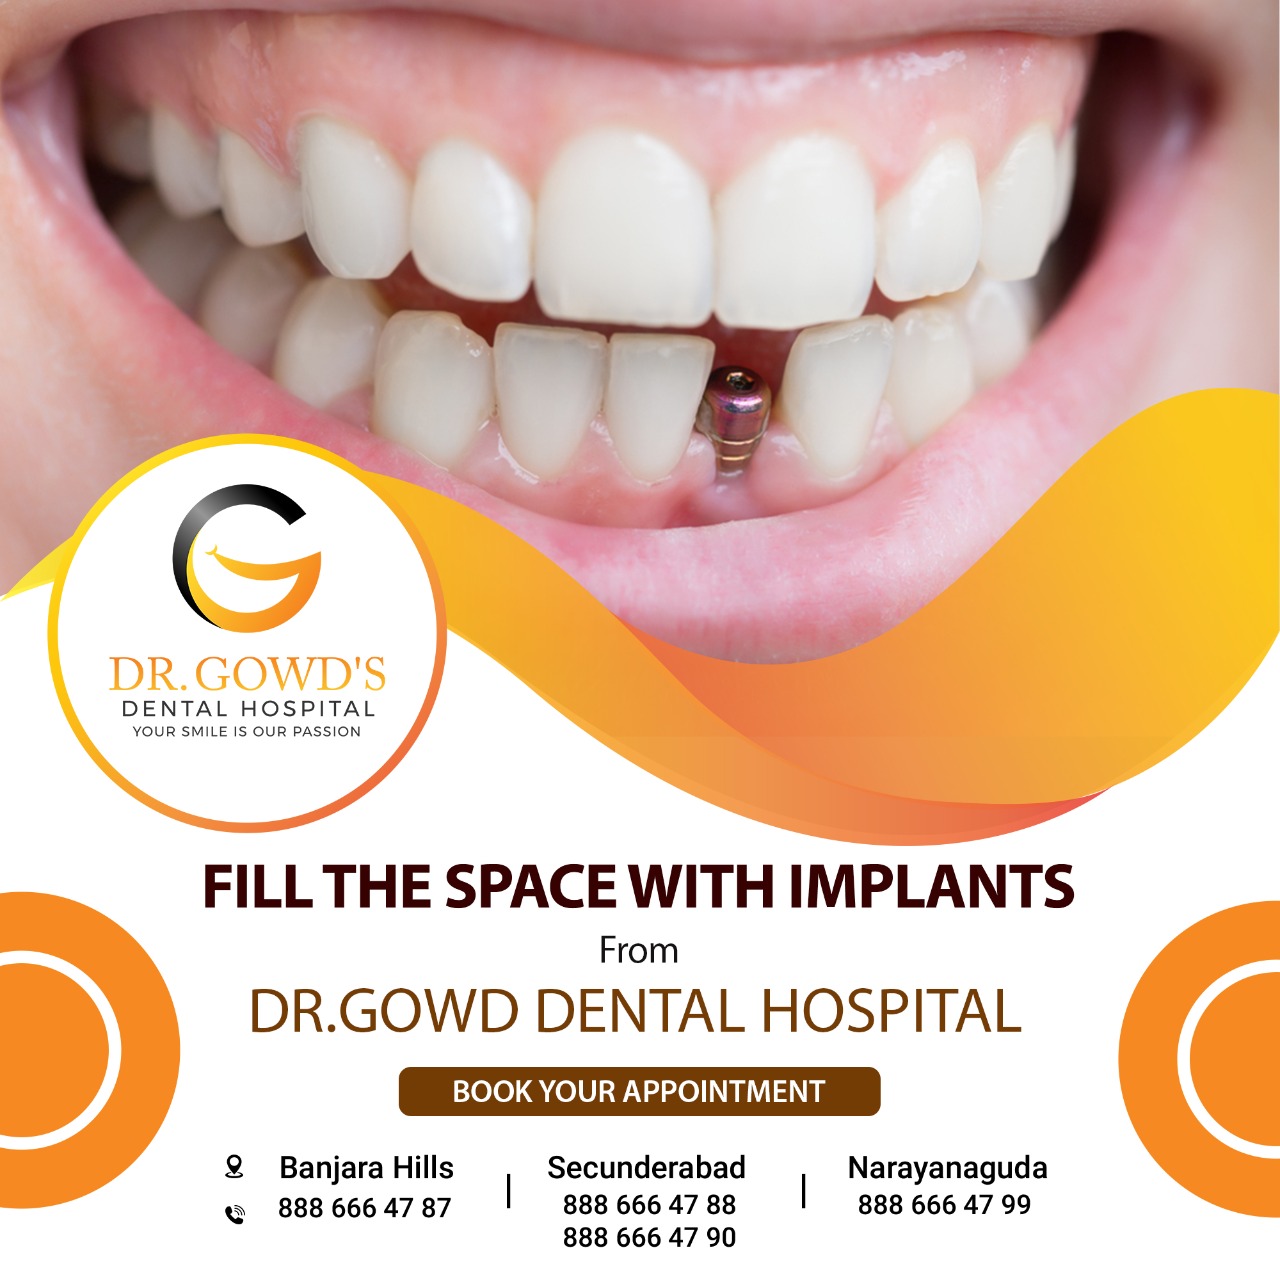 Best dental implant clinic in HyderabadHealth and BeautyHealth Care ProductsAll Indiaother